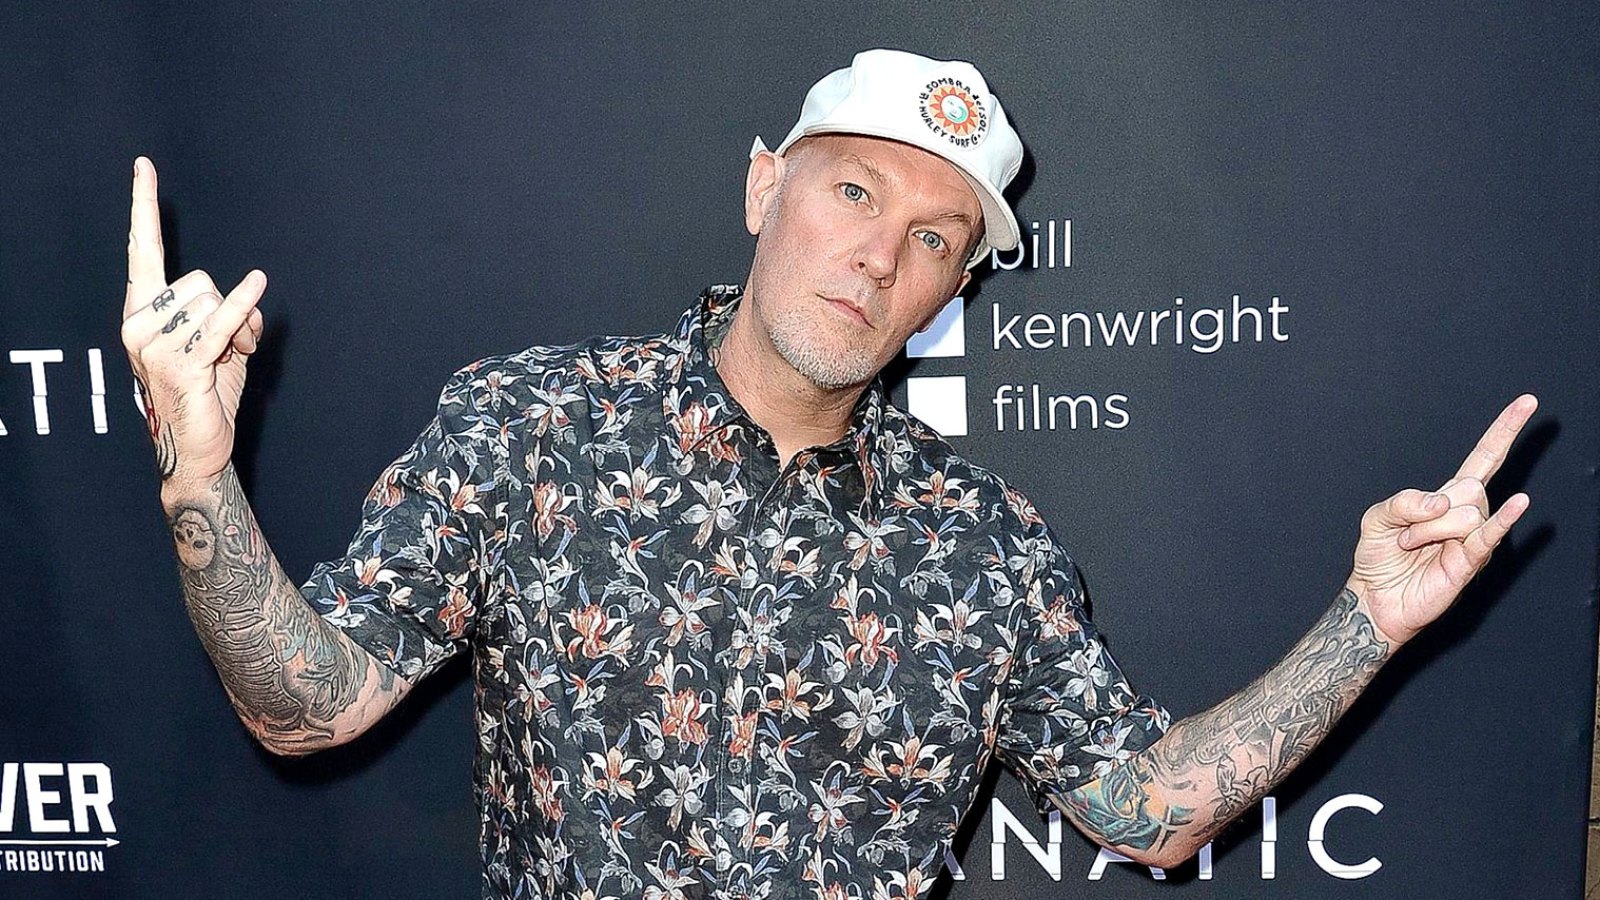 Limp Bizkit Fred Durst Is Nearly Unrecognizable With Mustache in New Selfie